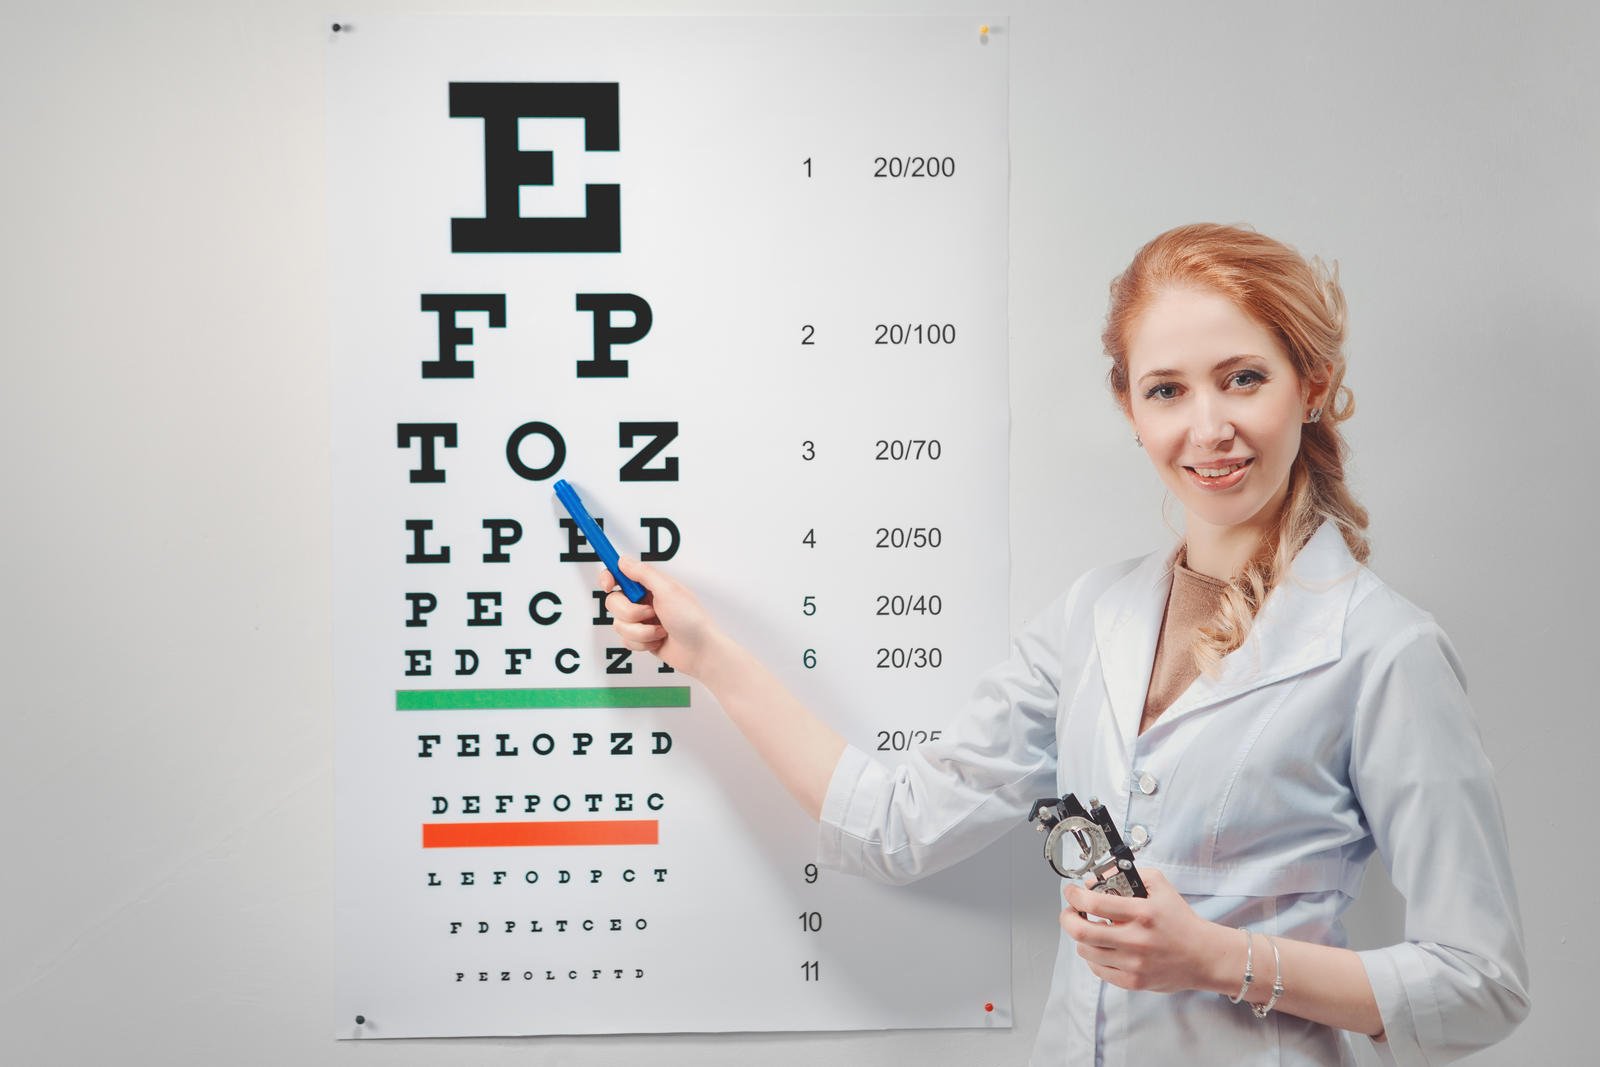 Patients should go for an eye examination as soon as they notice any change in their vision.